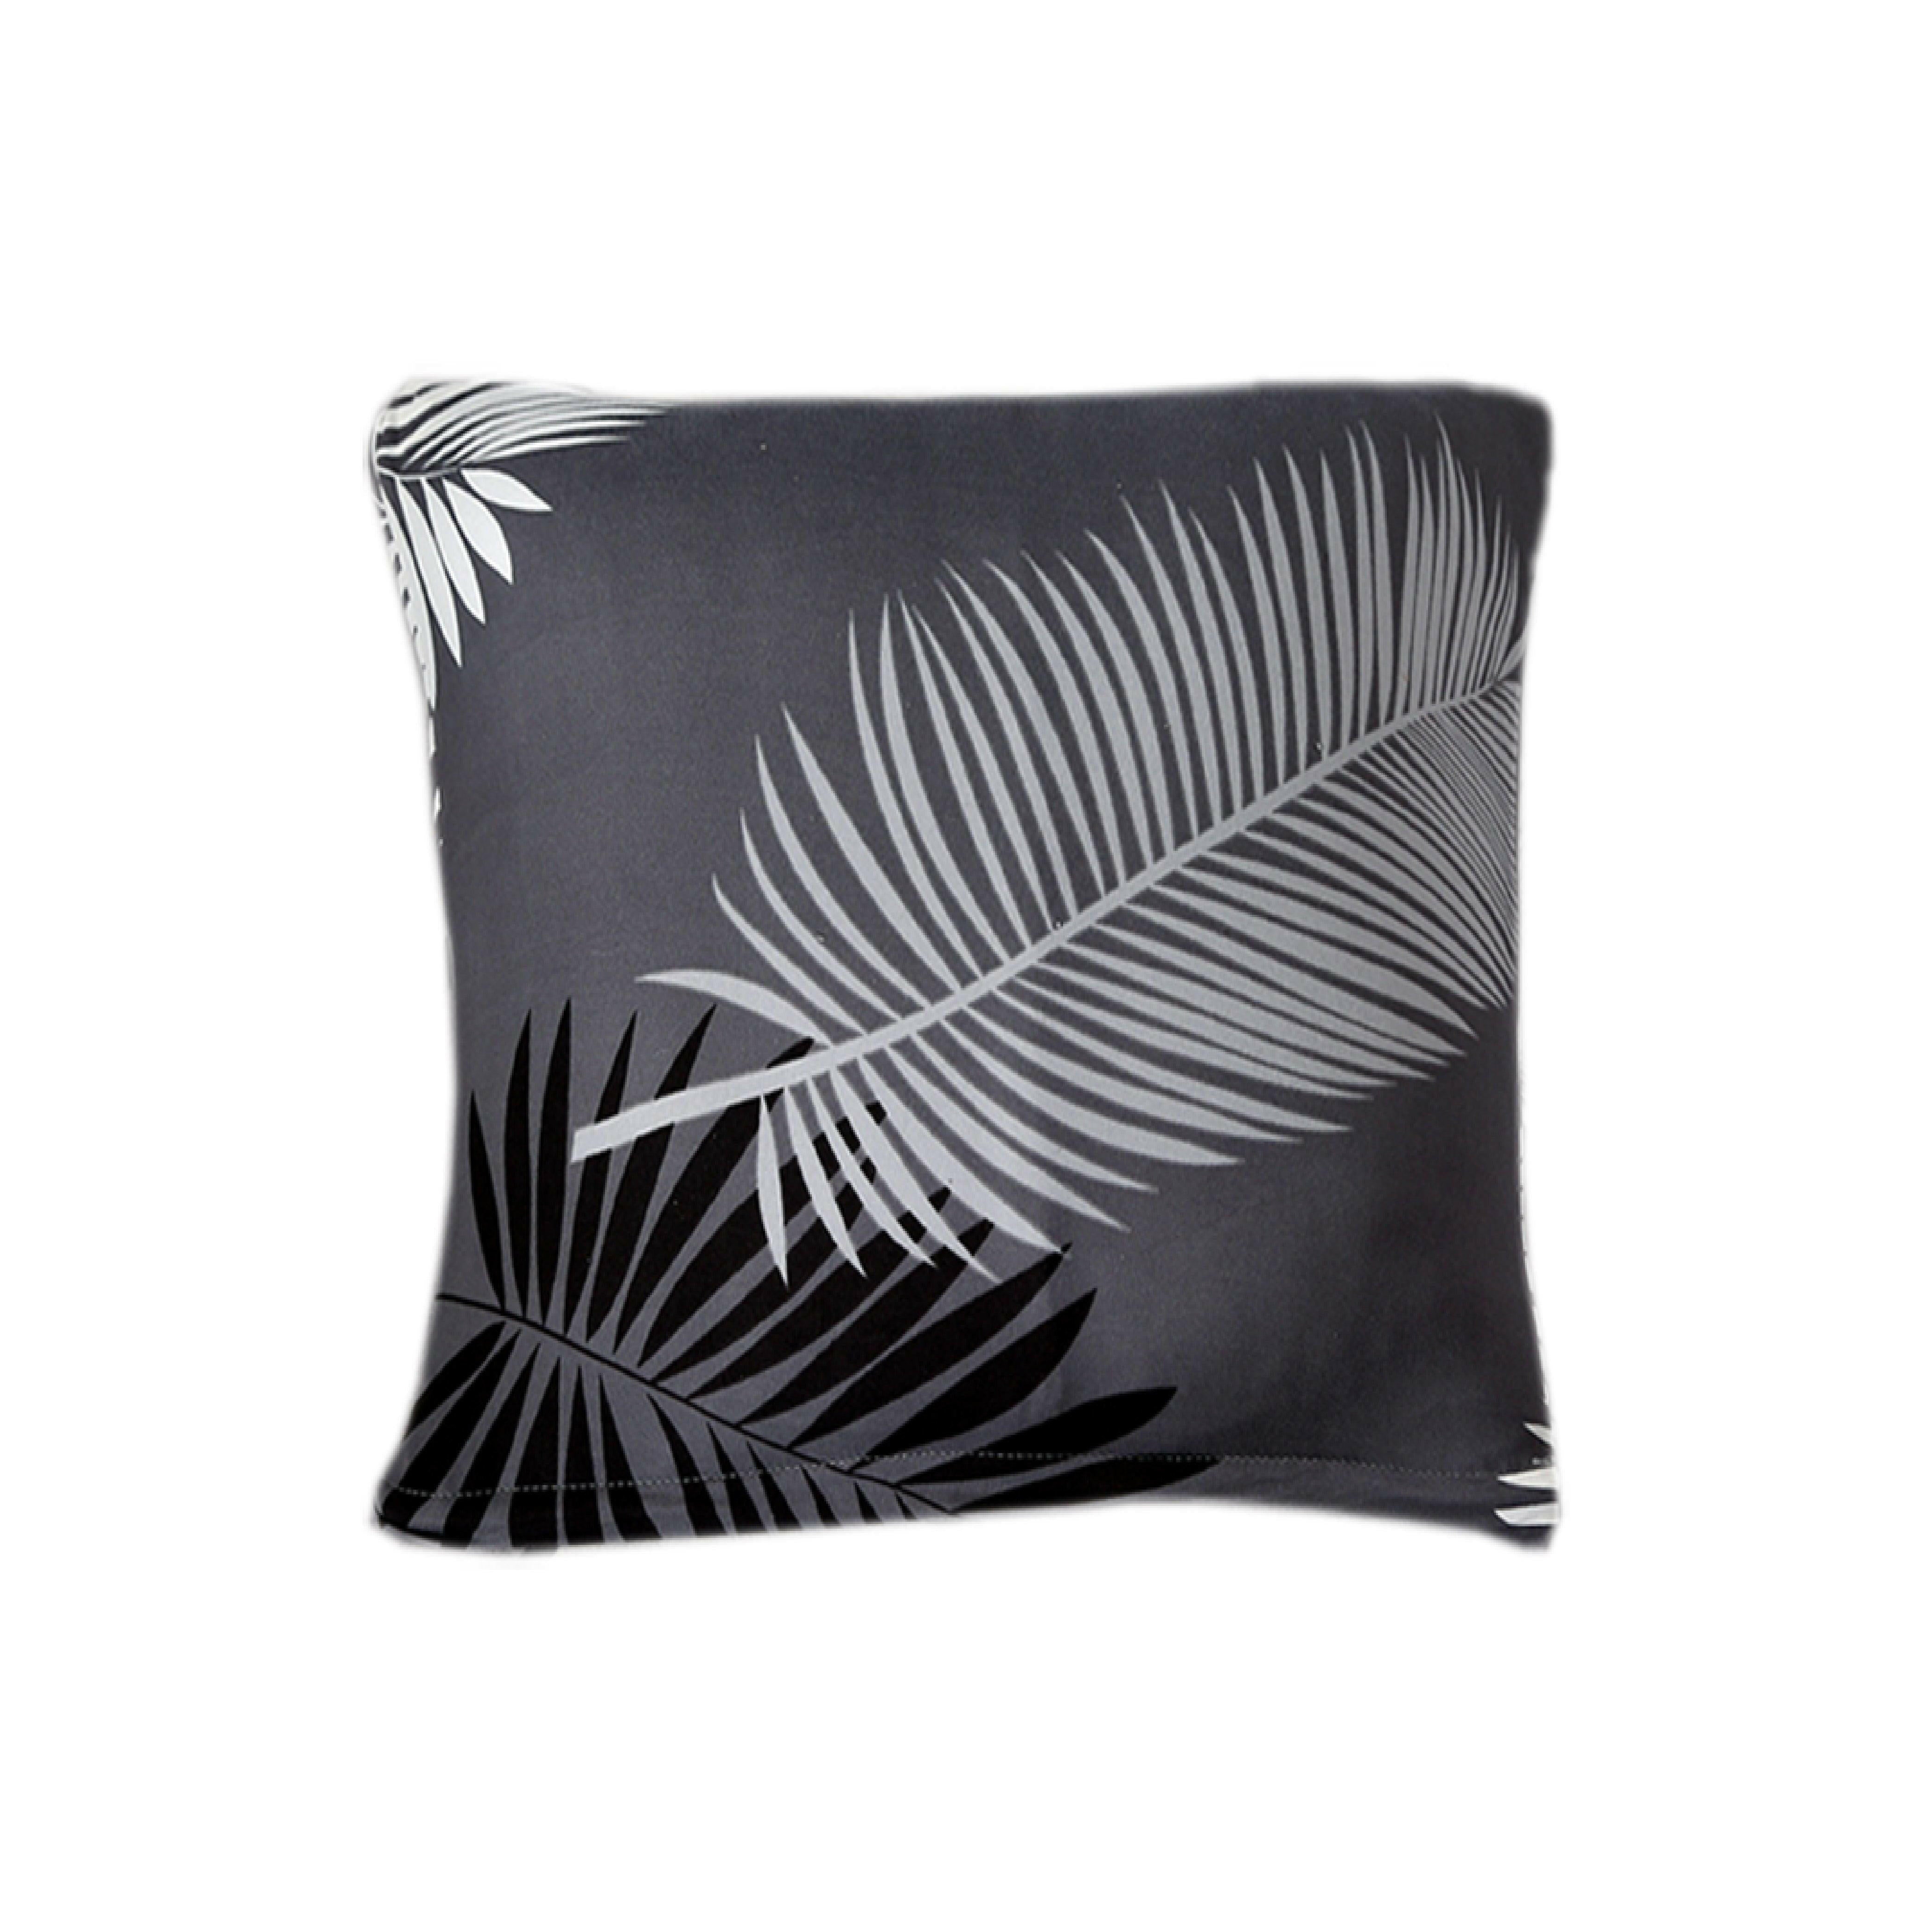 Hyper Cover Stretch Sofa Cover with Patterns Black Feather | Sofa Covers | Brilliant Home Living